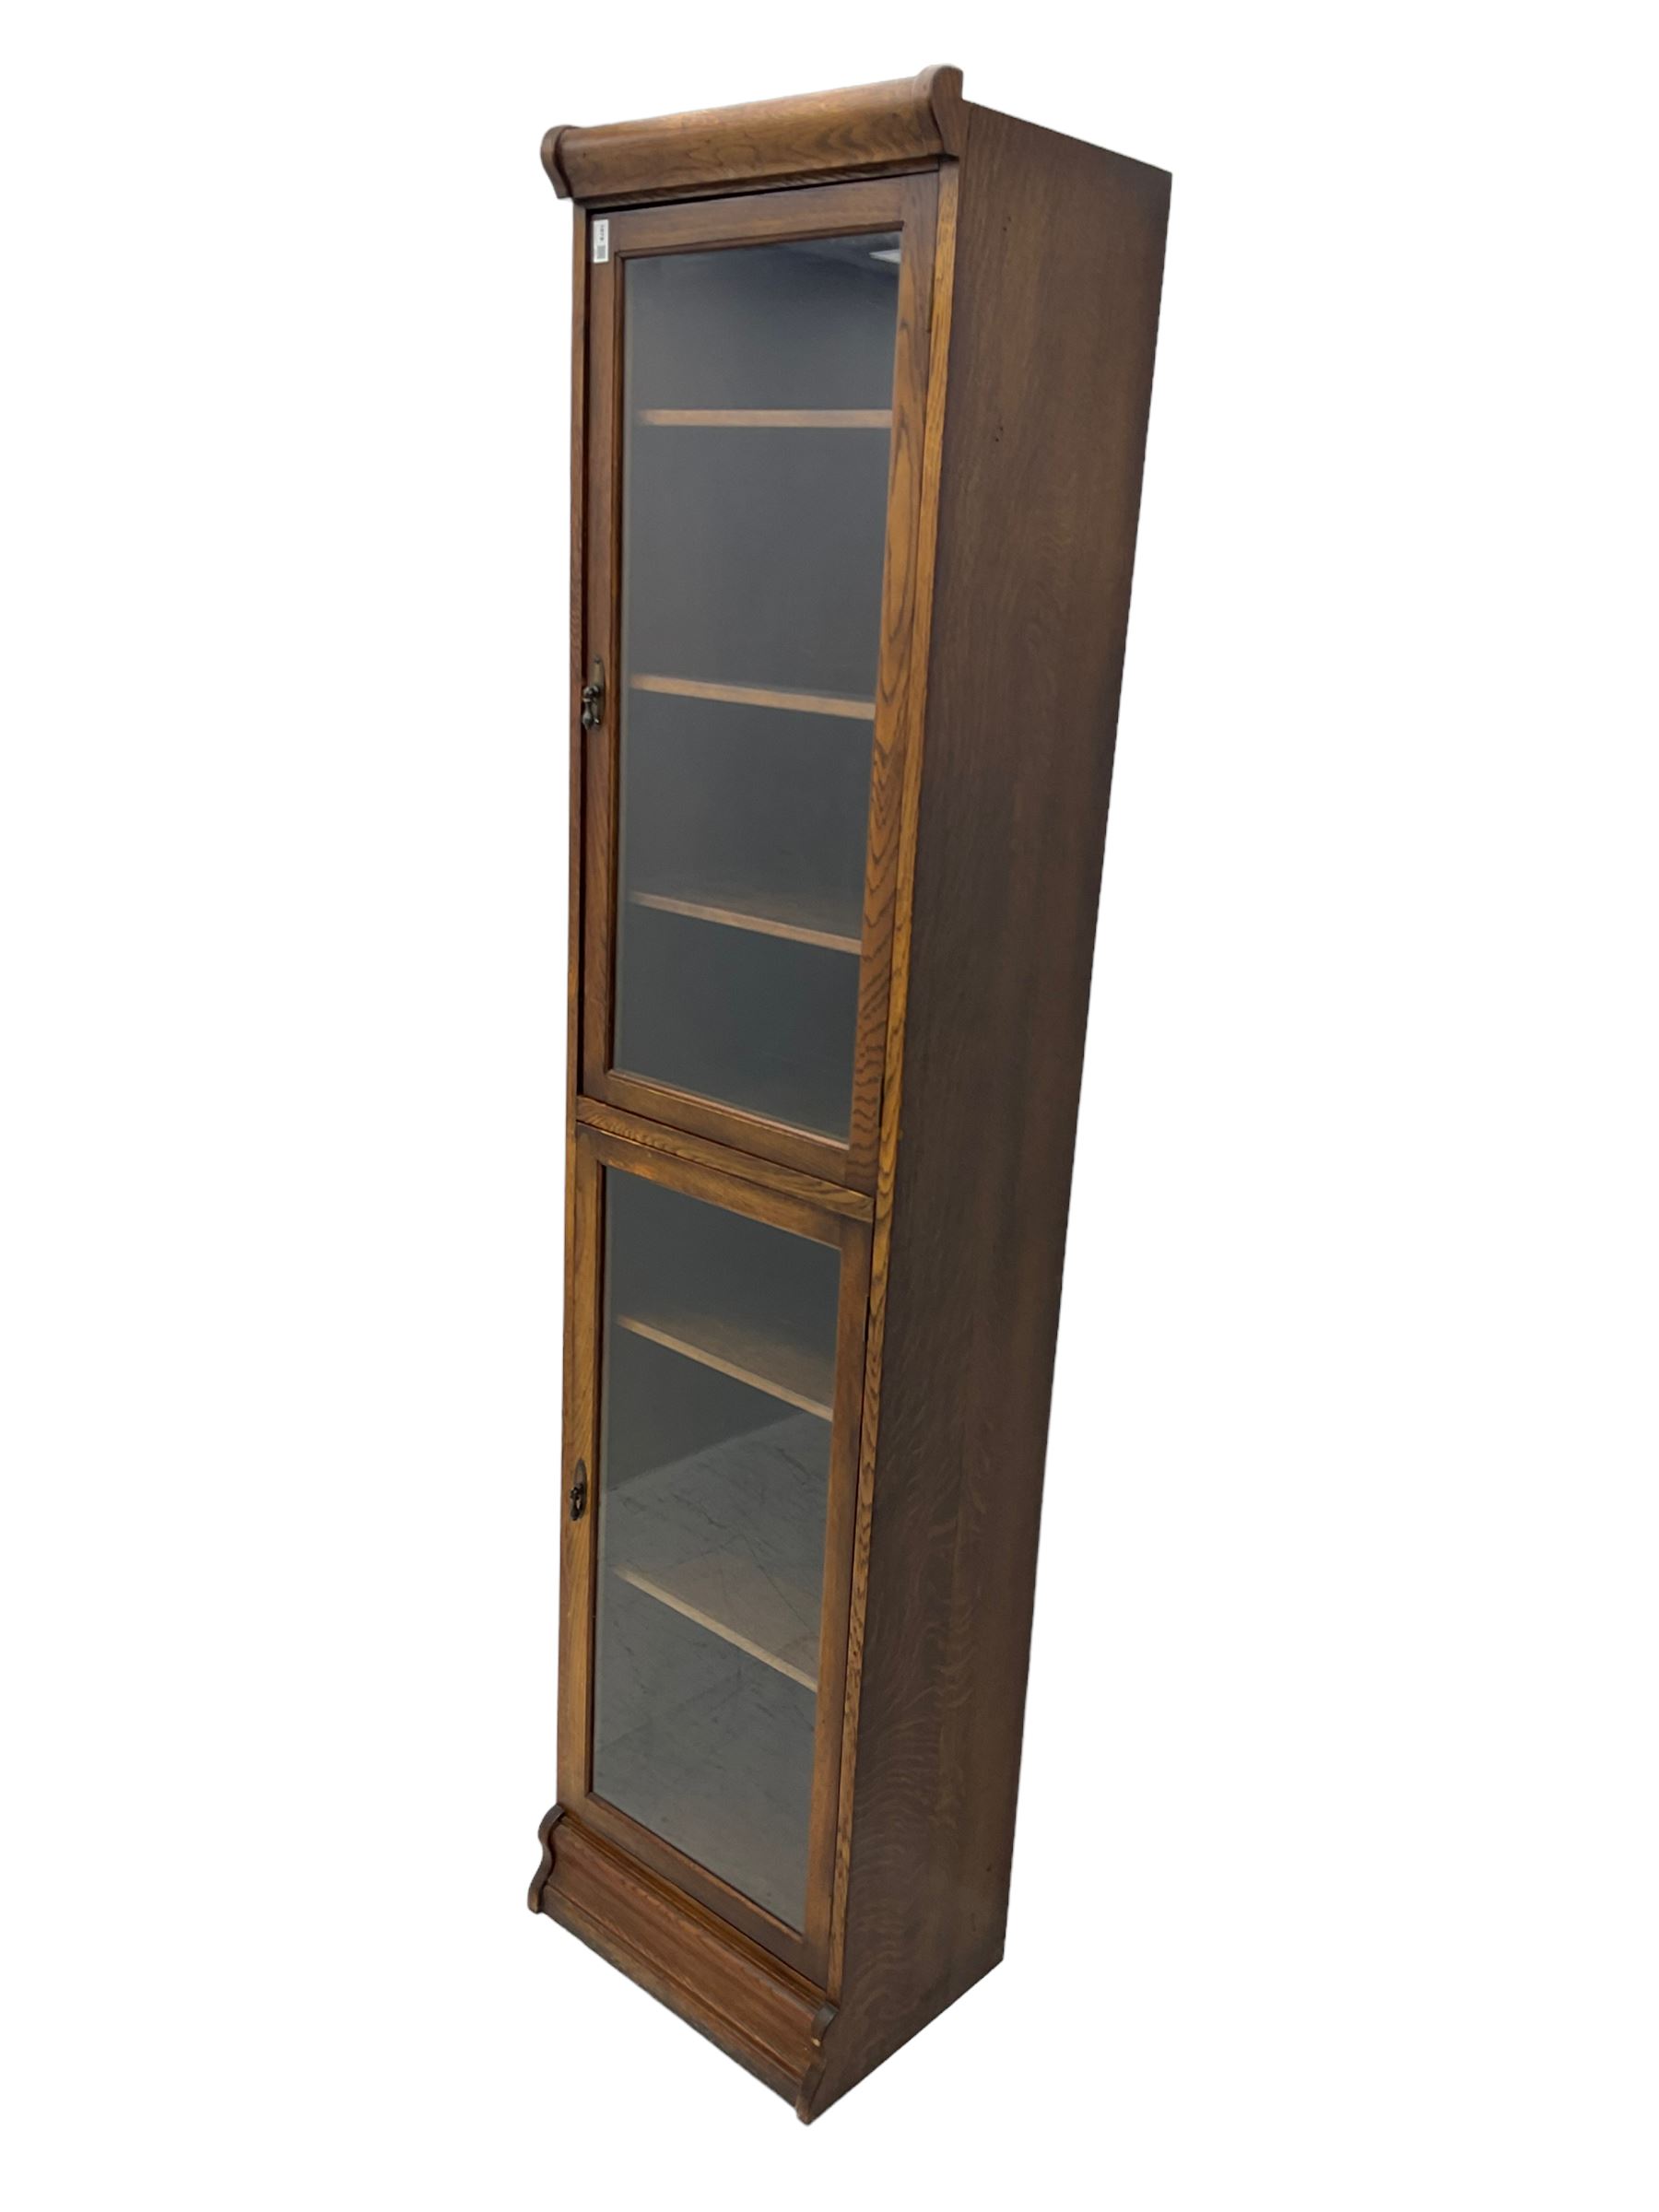 Early 20th century oak library bookcase - Image 3 of 8